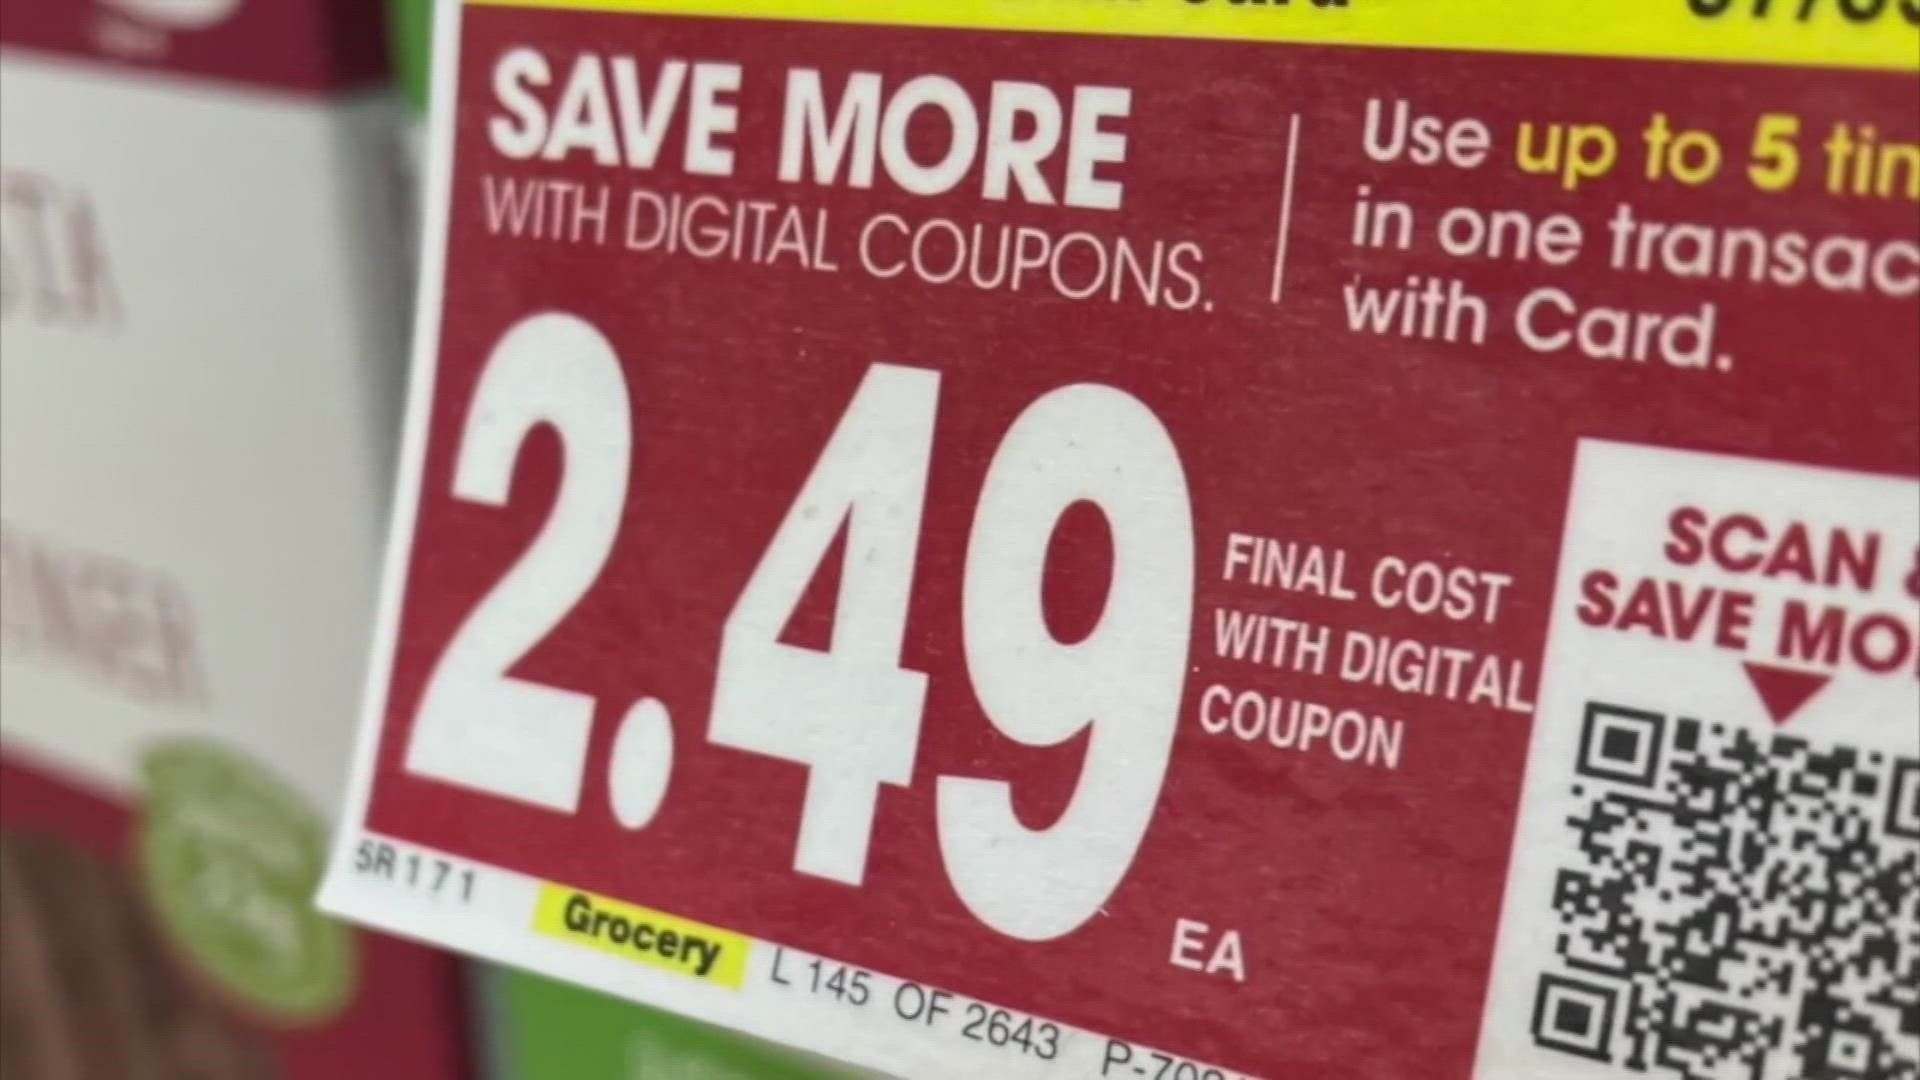 With grocery prices soaring, coupons can be a big money saver. But many shoppers these days are having trouble accessing supermarket coupons.